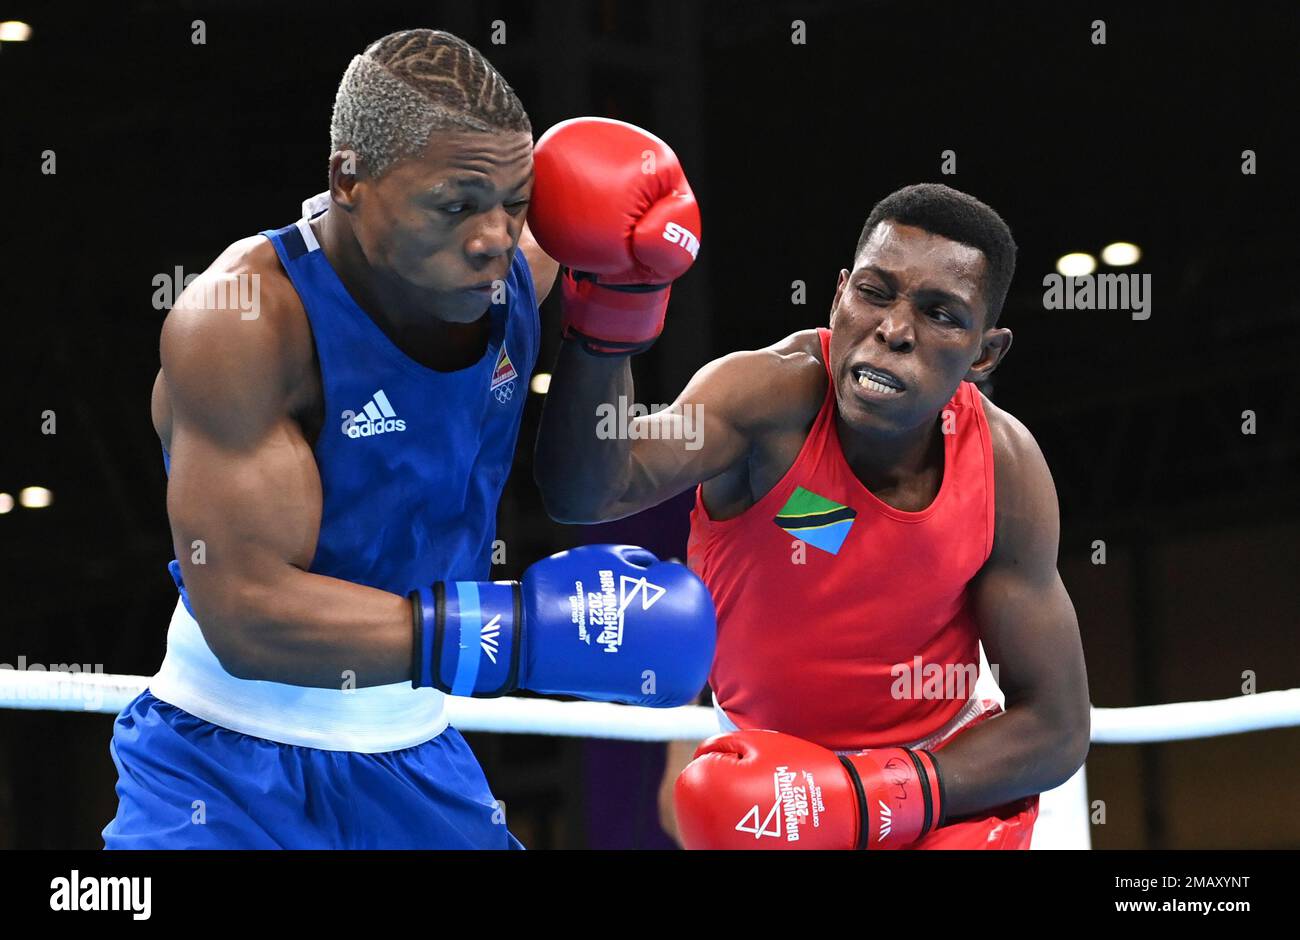 Tanzanias Kassim Mbundwike, right, and Mozambiques Tiago Osorio Muxanga compete during the Mens Light Middle semifinal boxing bout at the Commonwealth Games in Birmingham, England, Saturday, Aug